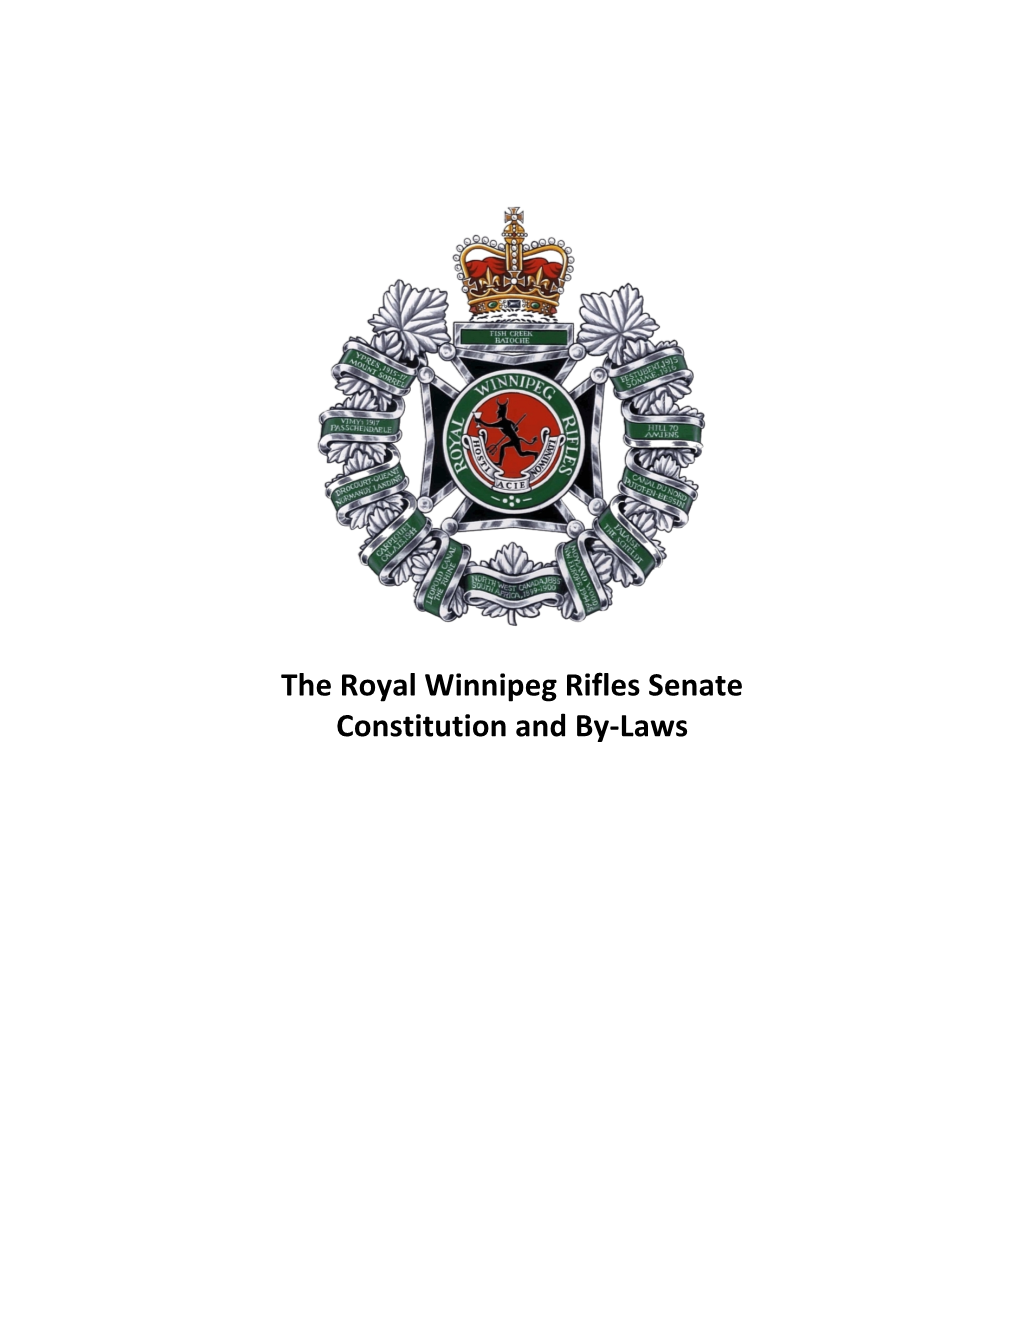 The Royal Winnipeg Rifles Senate Constitution and By-Laws